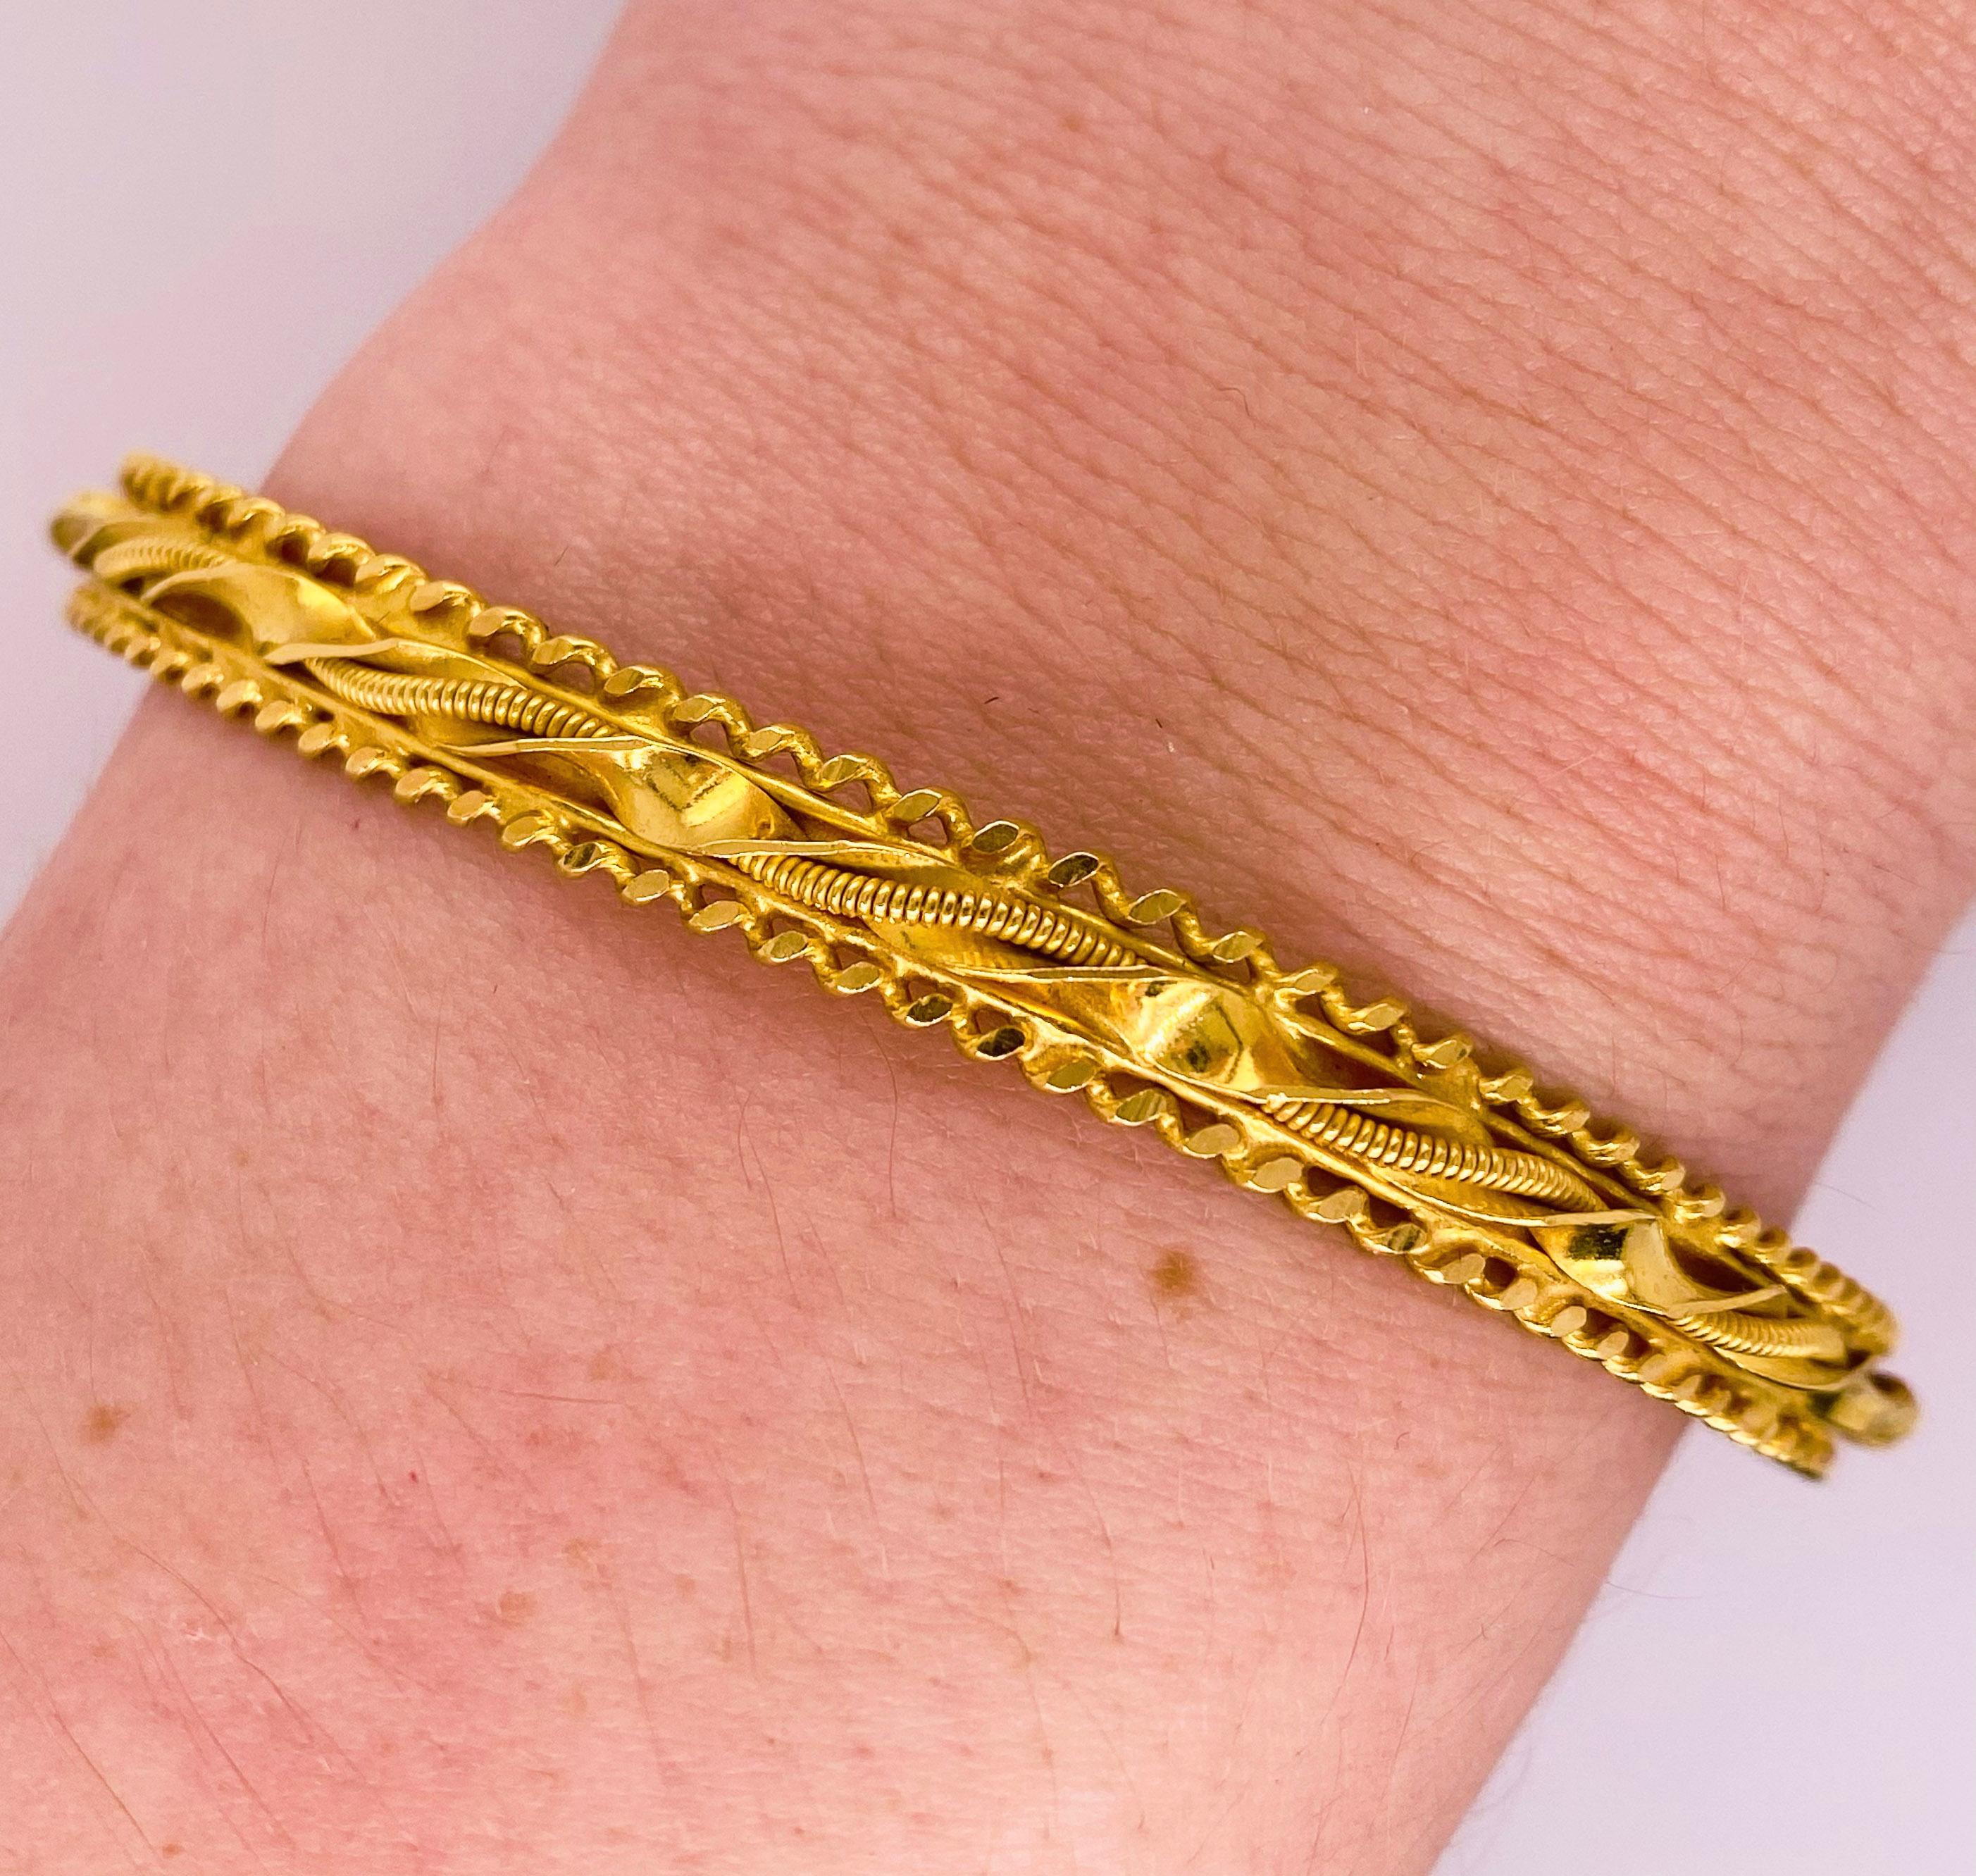 21 karat yellow gold bangle bracelet! The bracelet has a beaded design with twisted accents. It is a fine jewelry piece that will compliment you on every occasion! This bracelet would make the perfect gift for your loved one or yourself!
The details